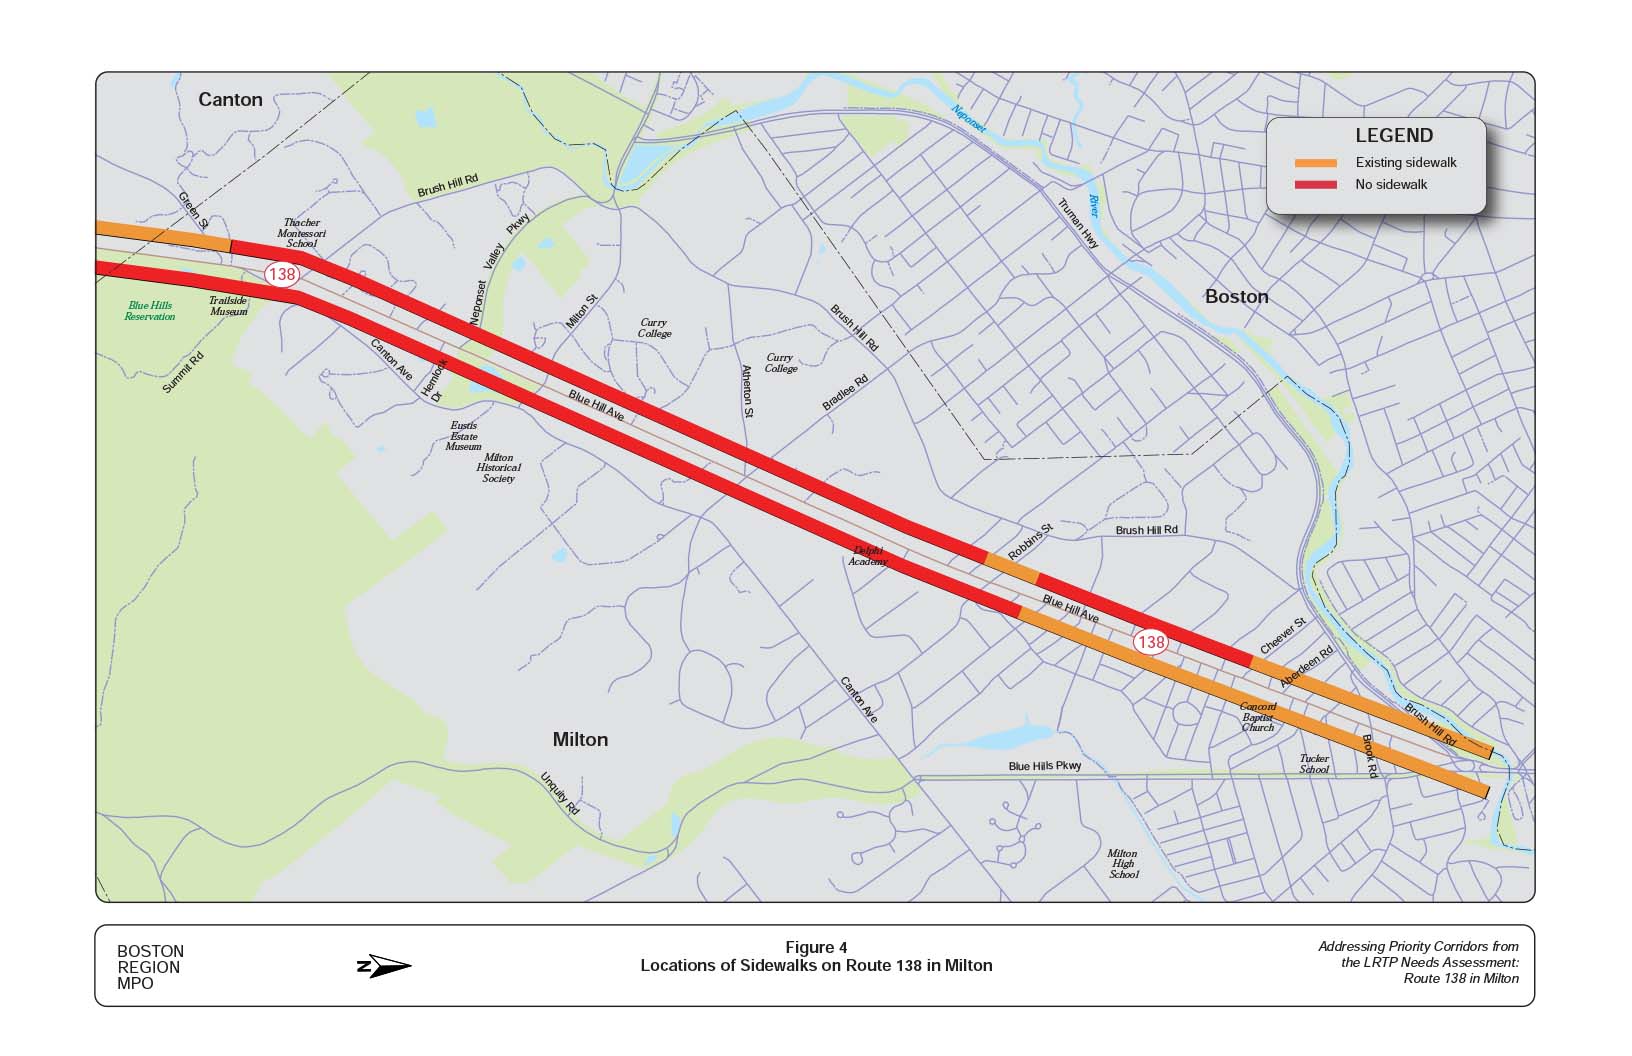 Figure 4 is a map of the study area showing the location of sidewalks on Route 138 in Milton.